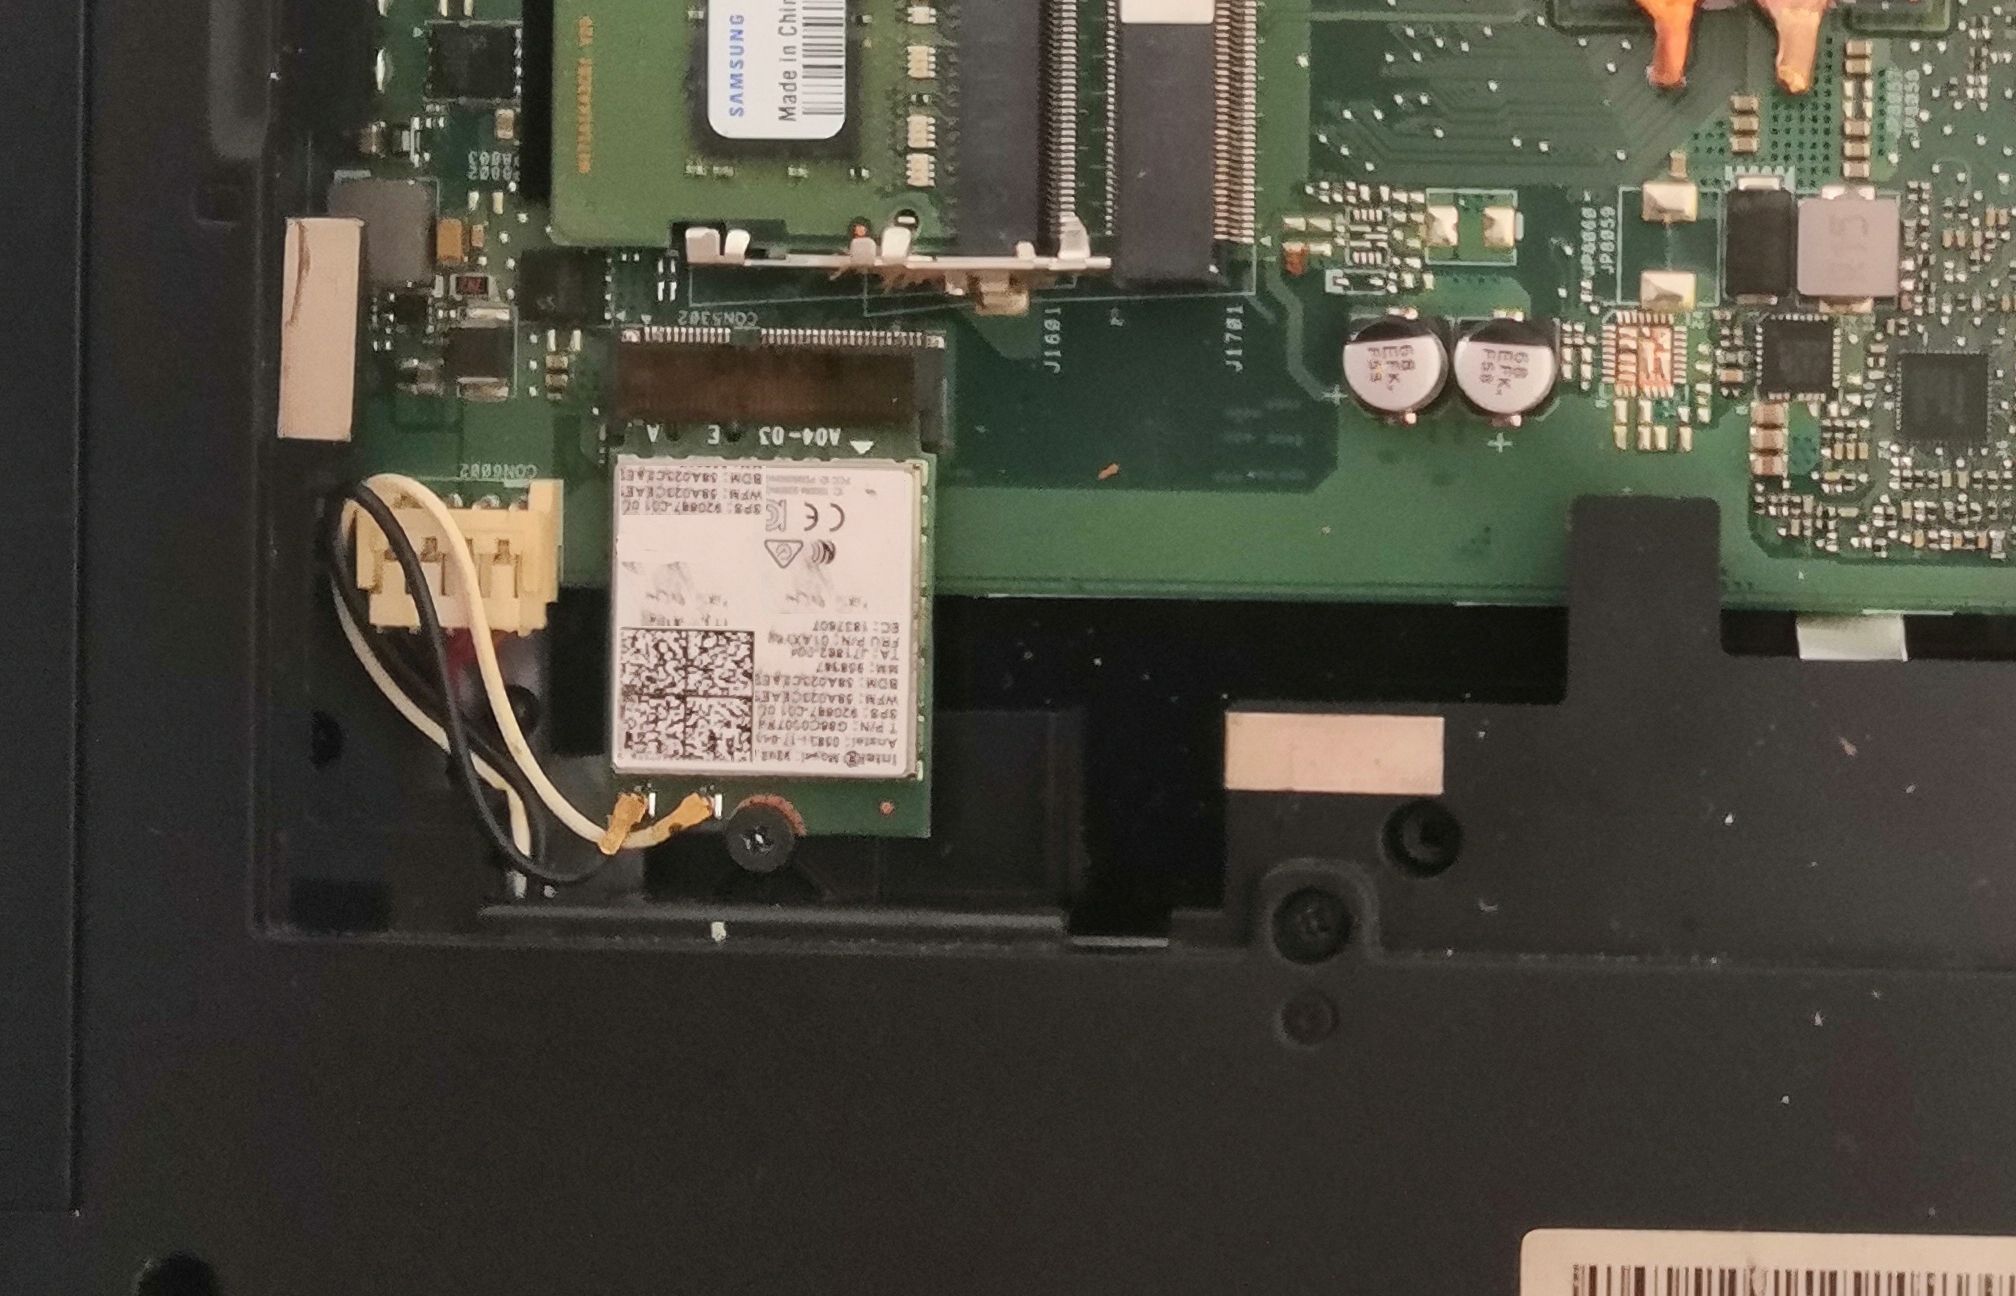 Wi-Fi adapter installed in laptop